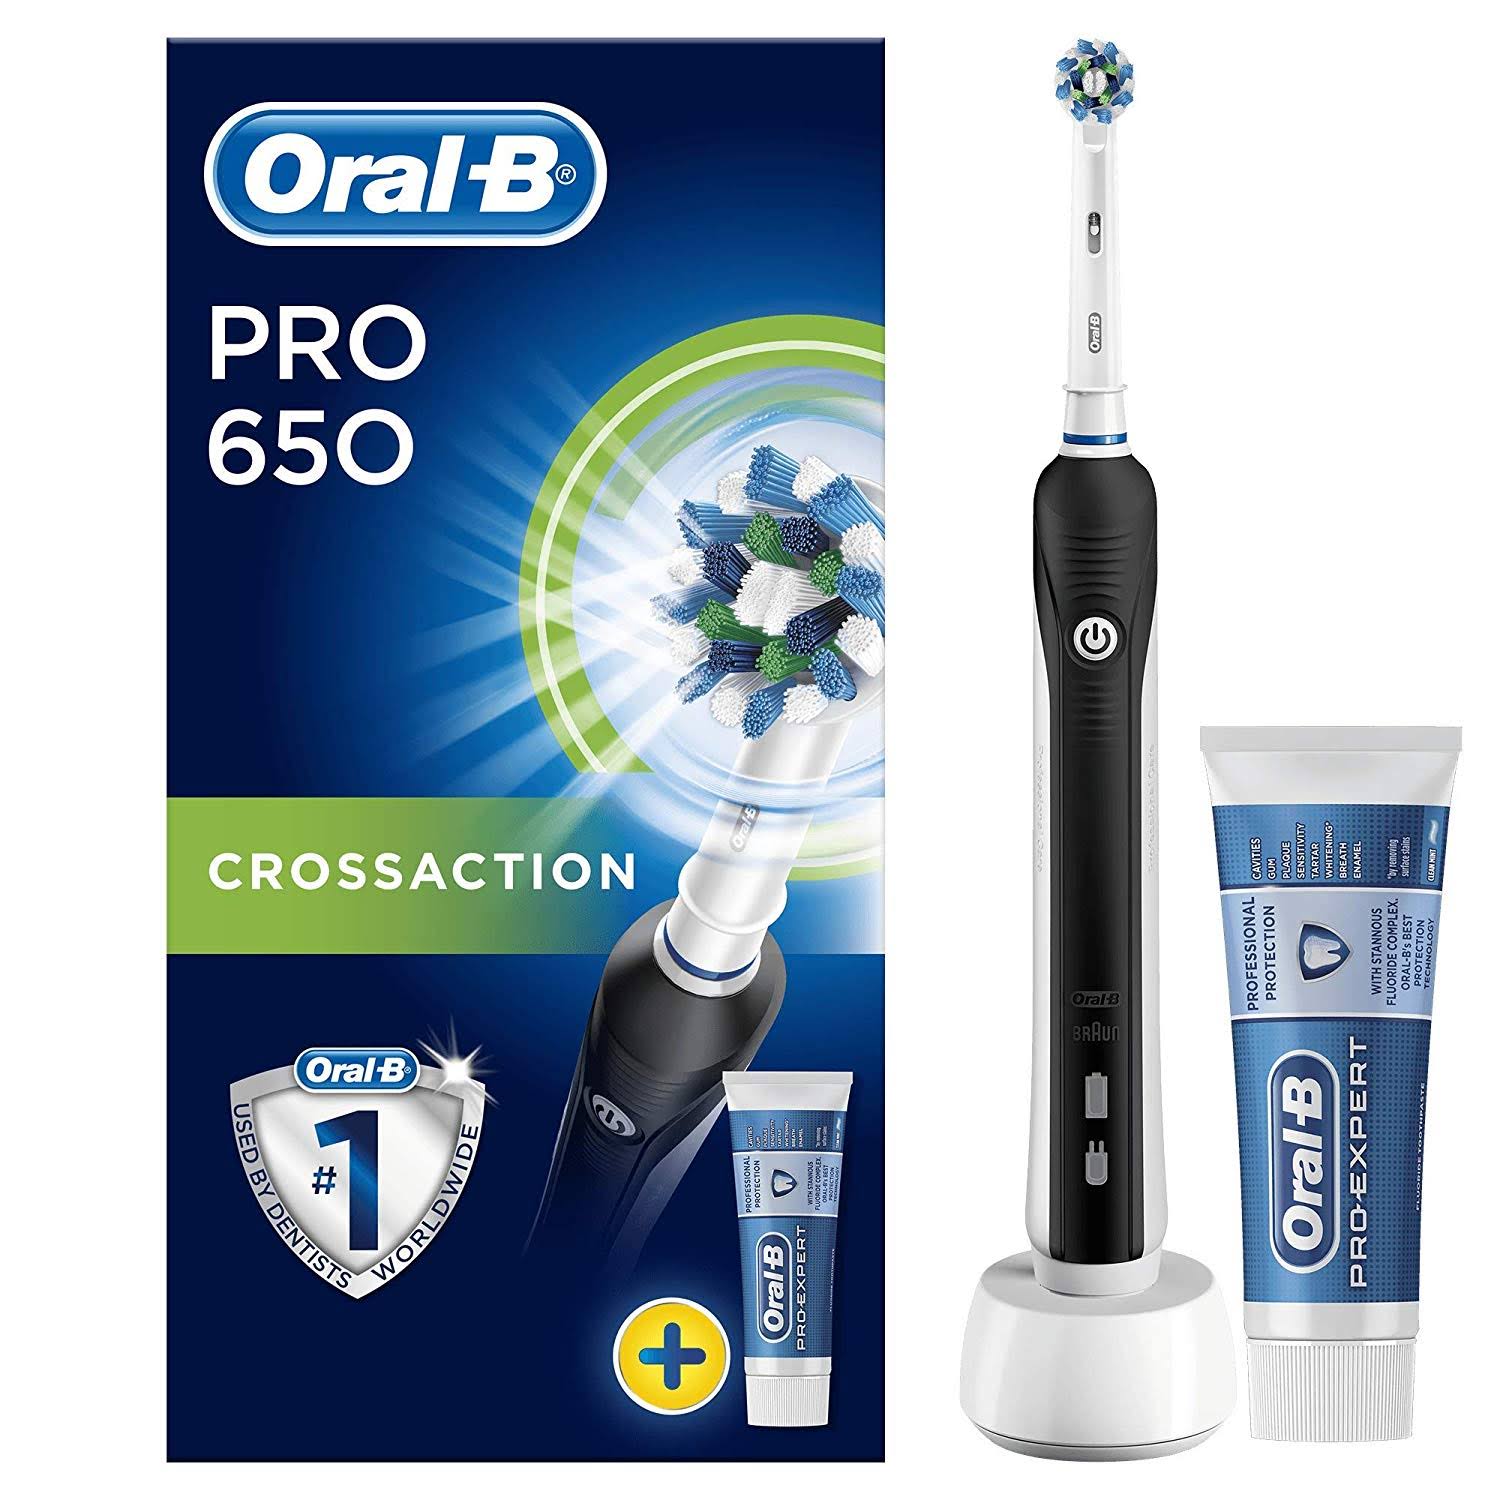 Oral-B Pro 650 3D Crossaction Electric Toothbrush - with Toothpaste